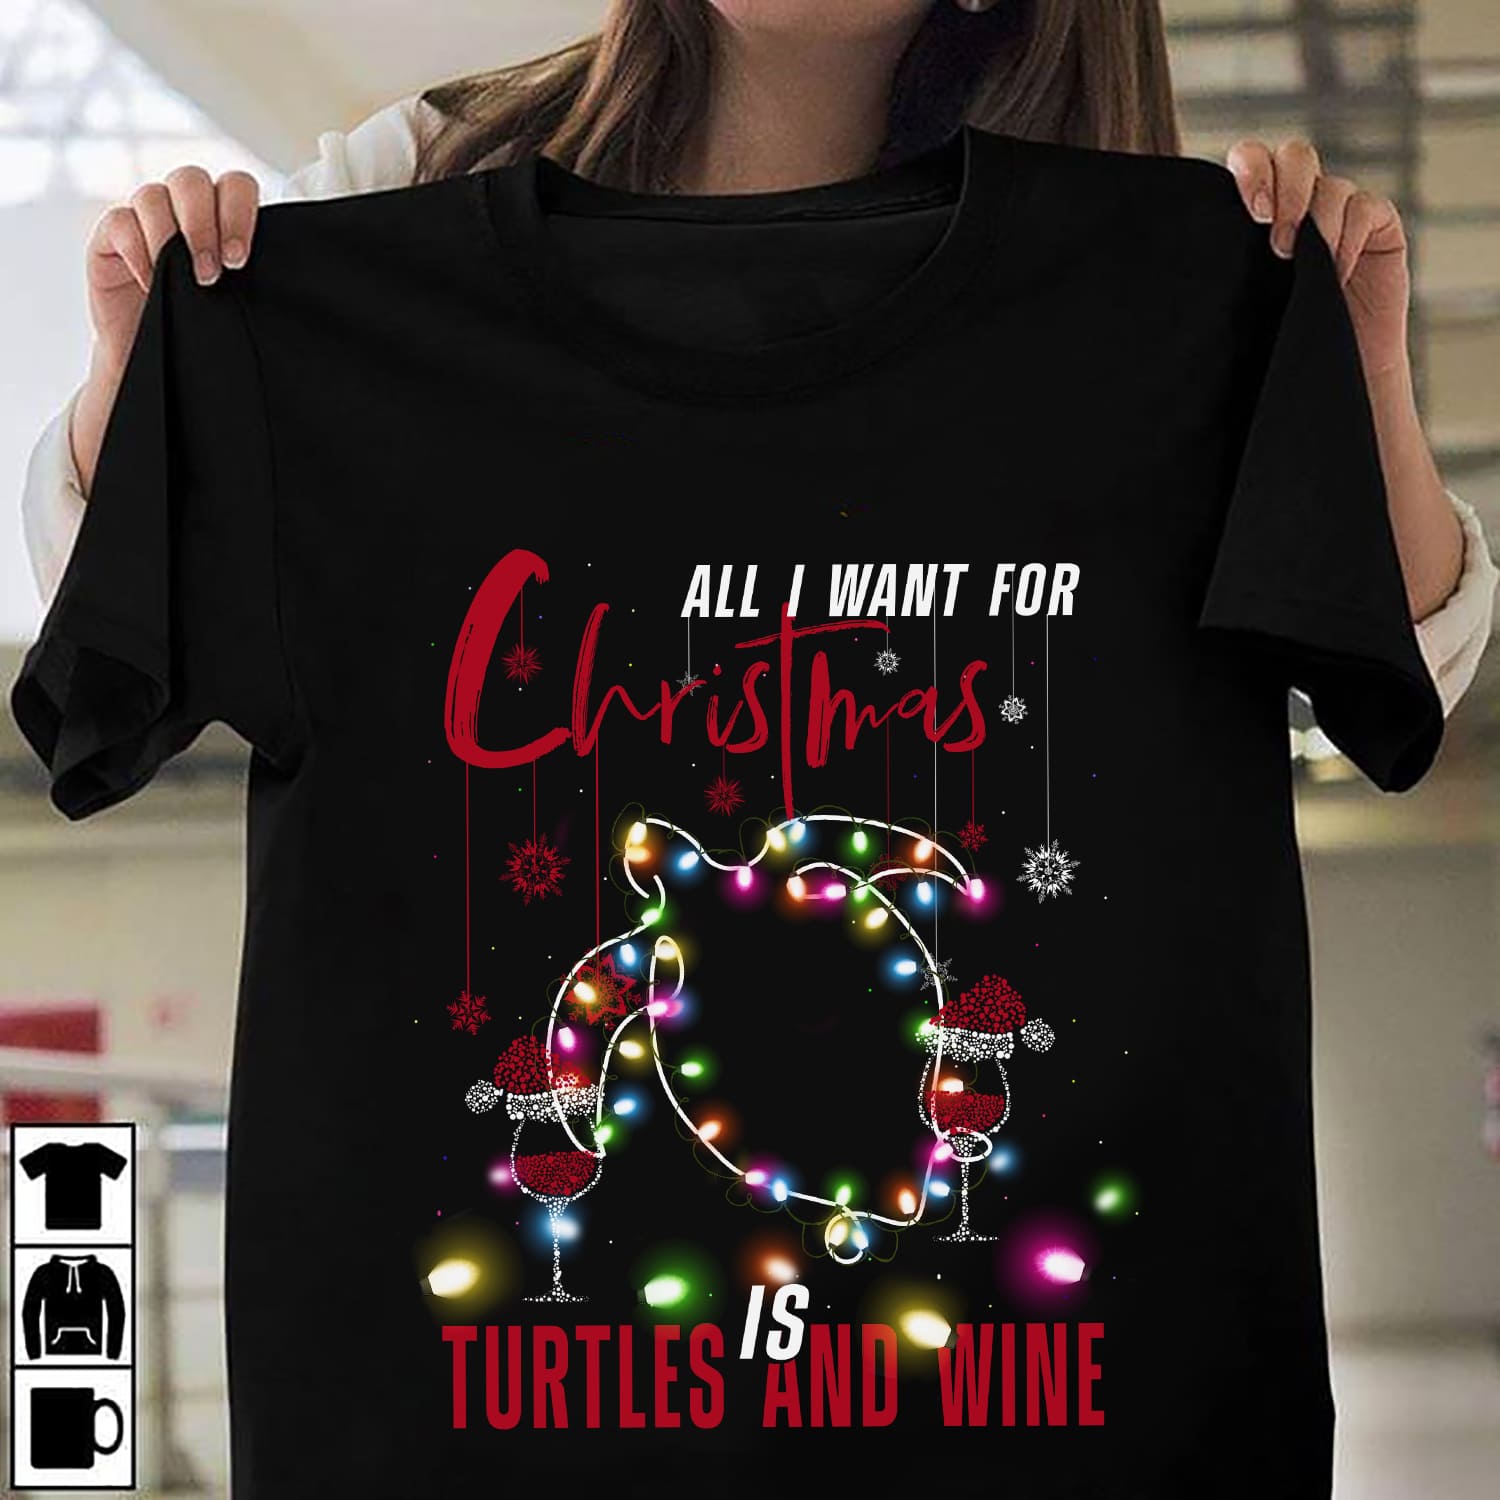 All I want for Christmas is turtles and wine - Christmas ugly sweater, love drinking wine